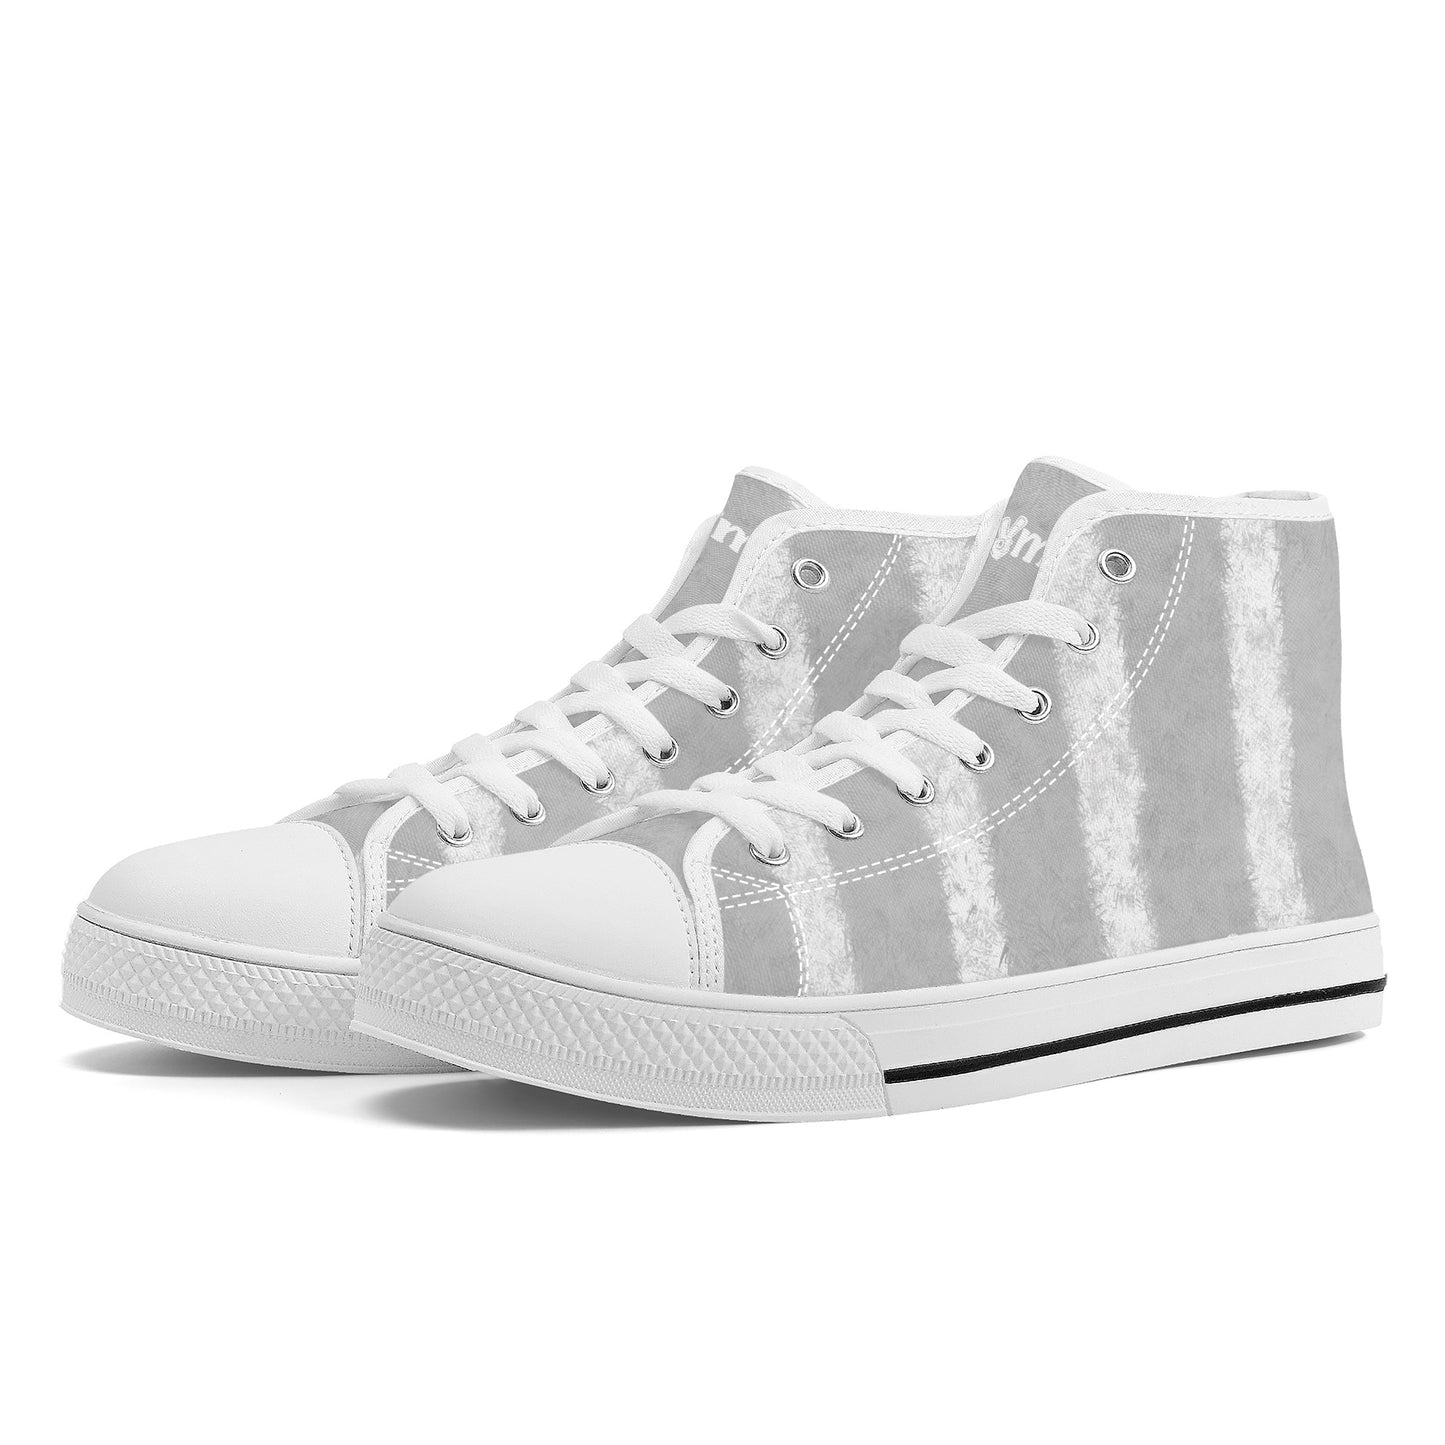 "Nix Plume" High Top Canvas Shoes